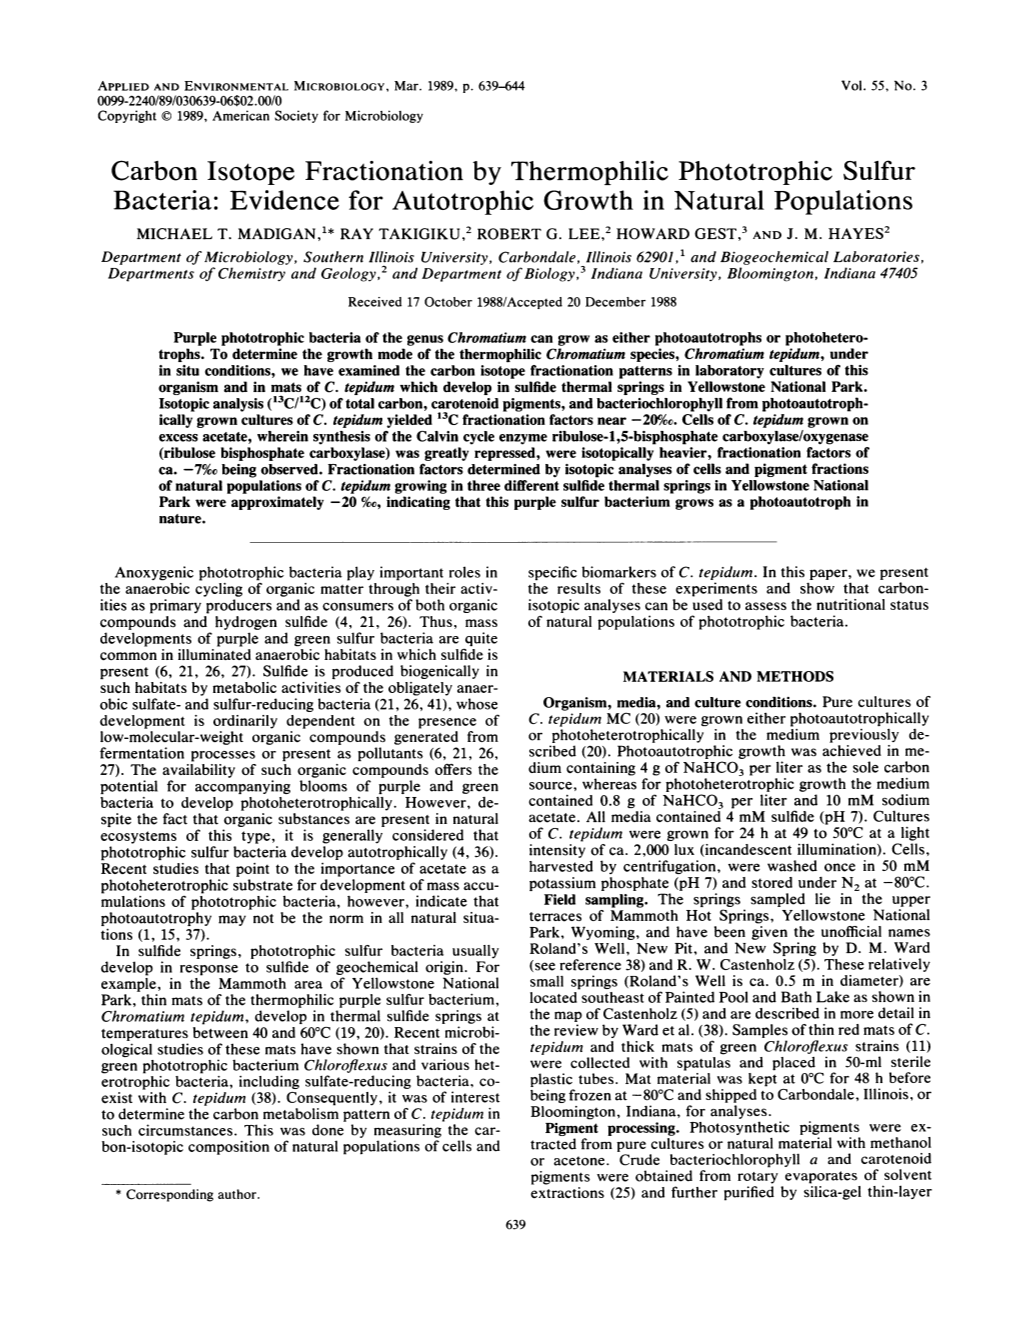 Carbon Isotope Fractionation by Thermophilic Phototrophic Sulfur Bacteria: Evidence for Autotrophic Growth in Natural Populations MICHAEL T